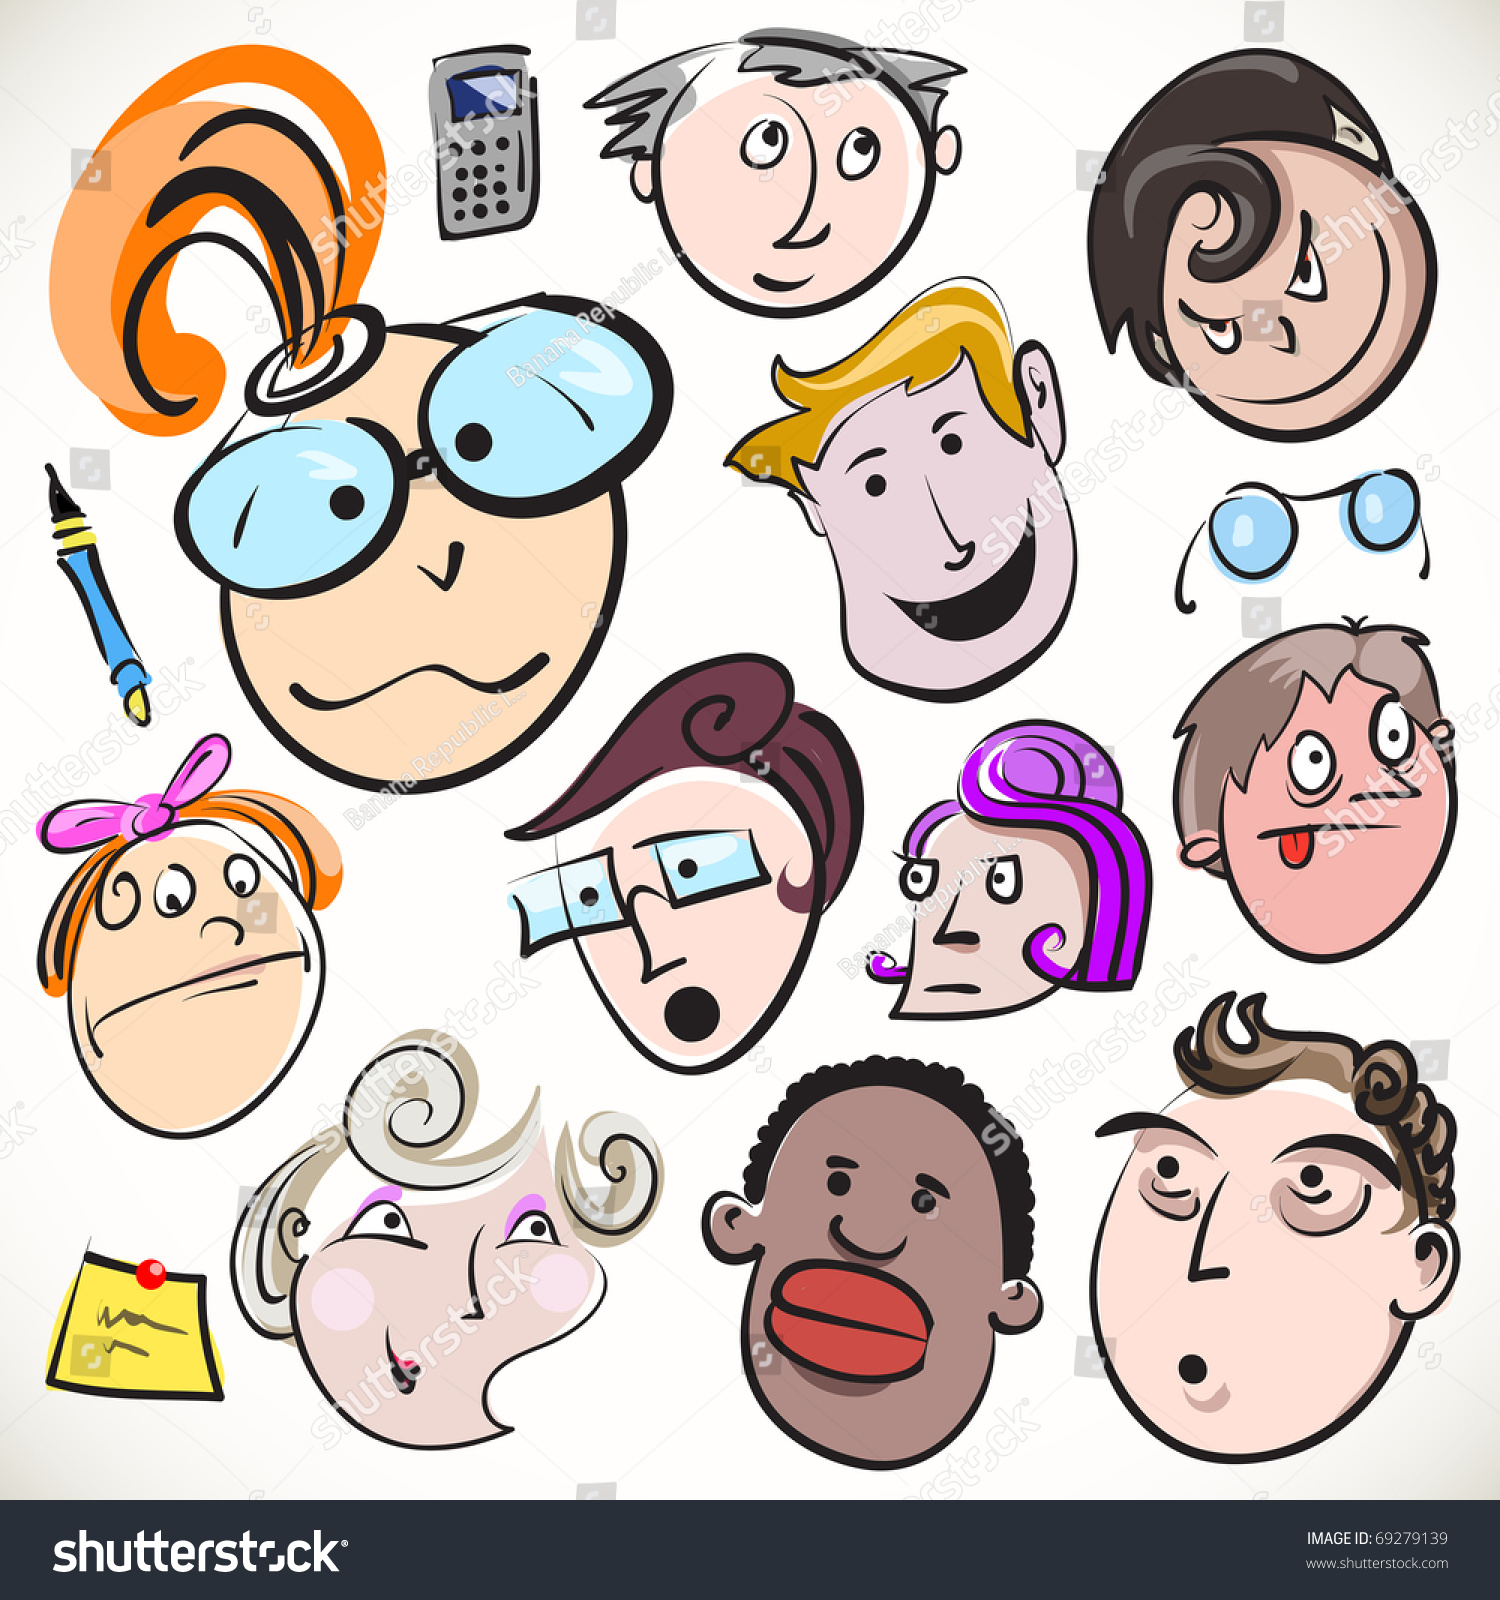 Funny Cartoon Faces Vector Doodle People Stock Vector Royalty Free